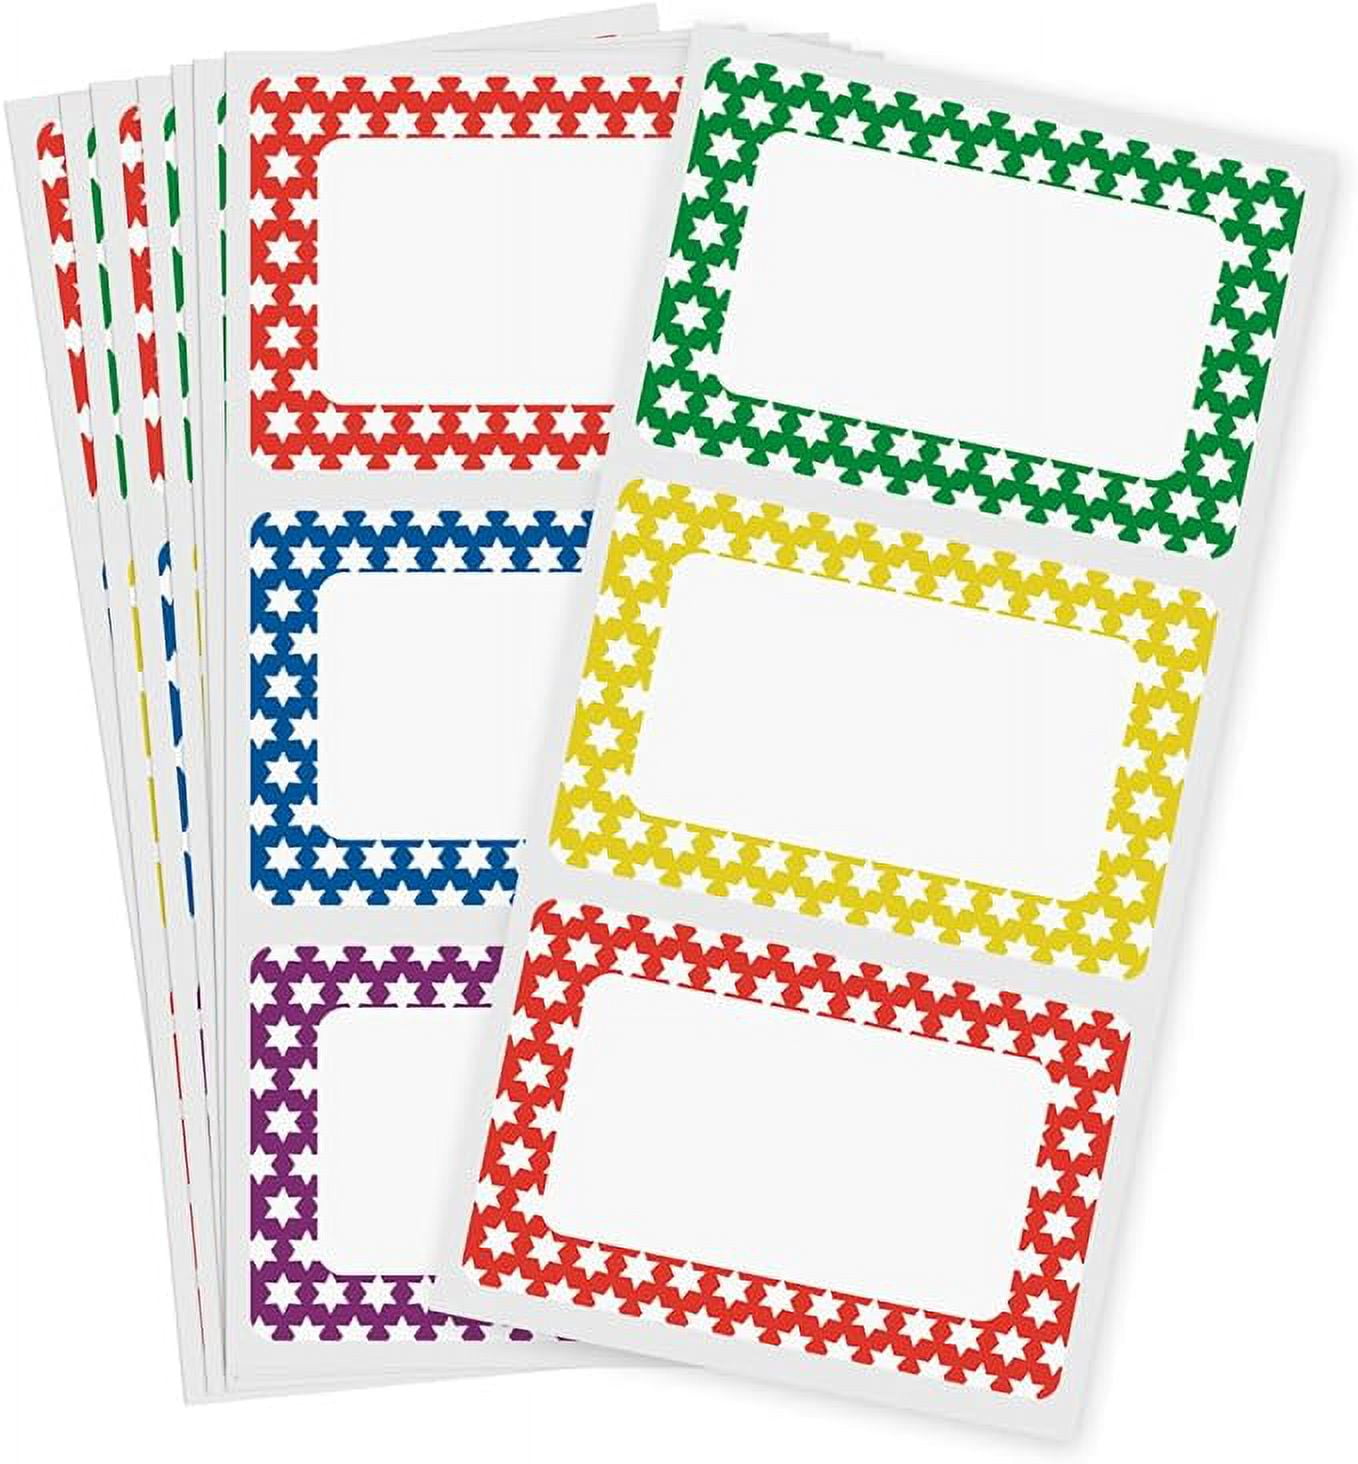  600 Pcs 36 Sheets Letter Stickers 2.5 Inches Colorful Large  Alphabet Number Set Self Adhesive Letter Decals for Bulletin Board, Locker,  Scrapbooking, Poster Board, Classroom Wall : Office Products